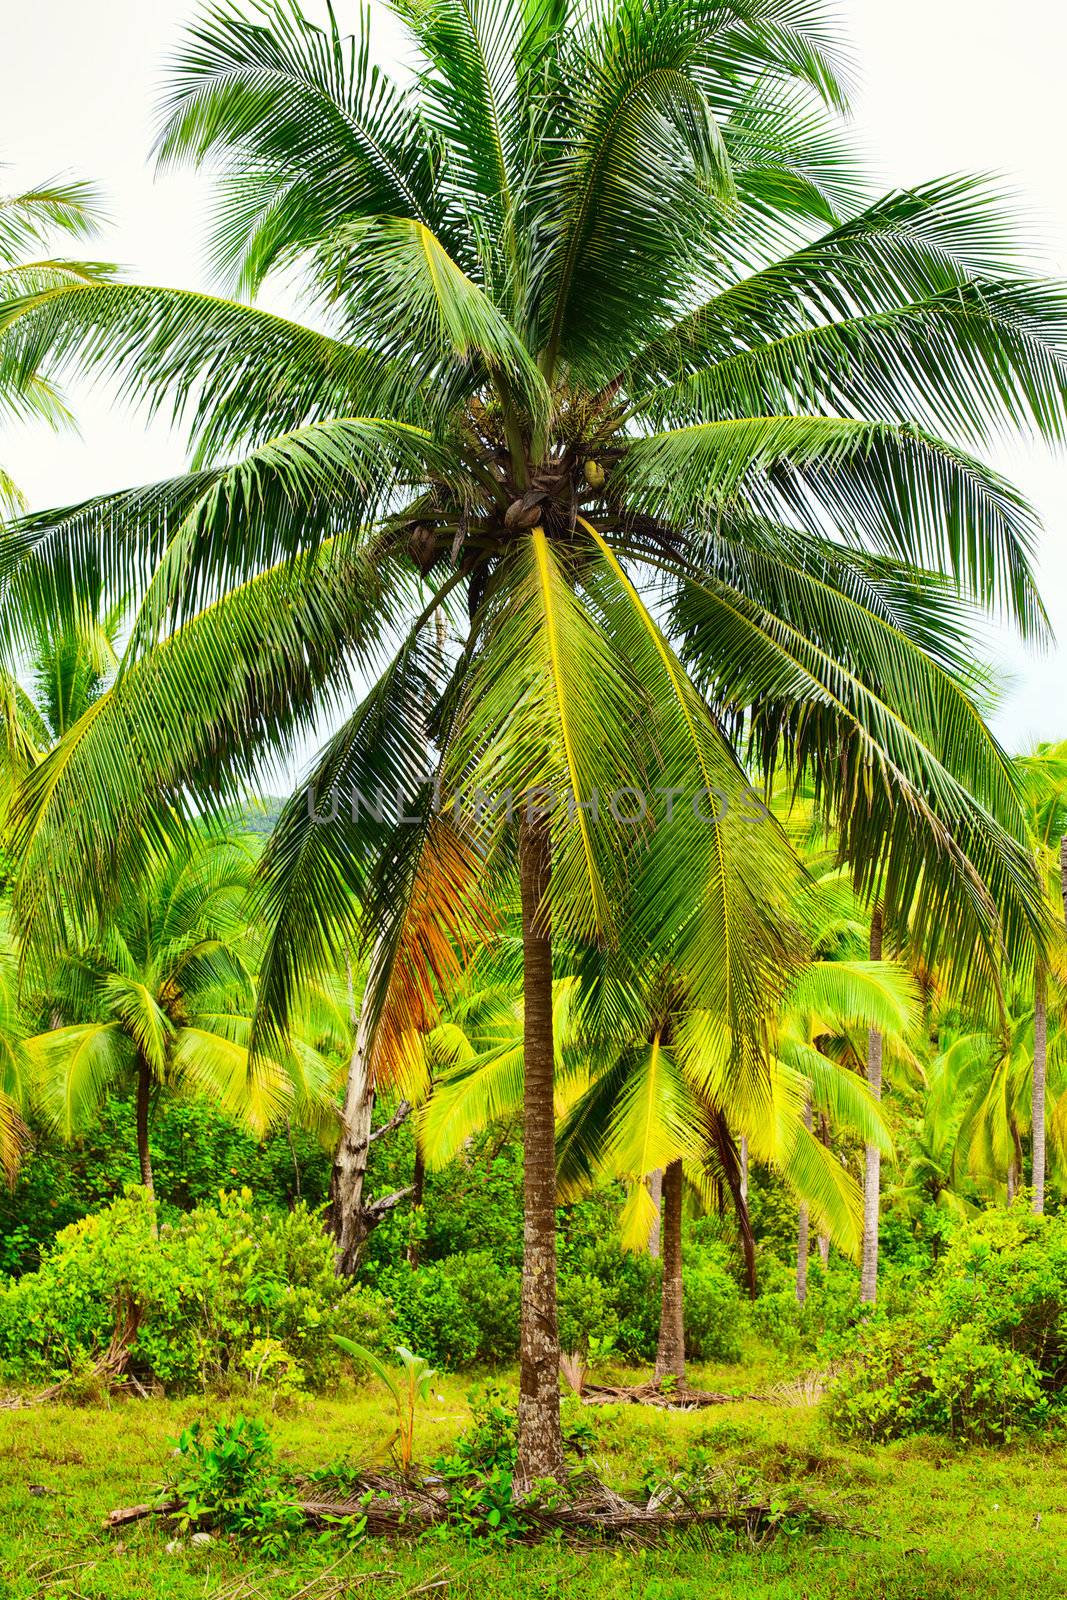 green coconut palm against blue sky background